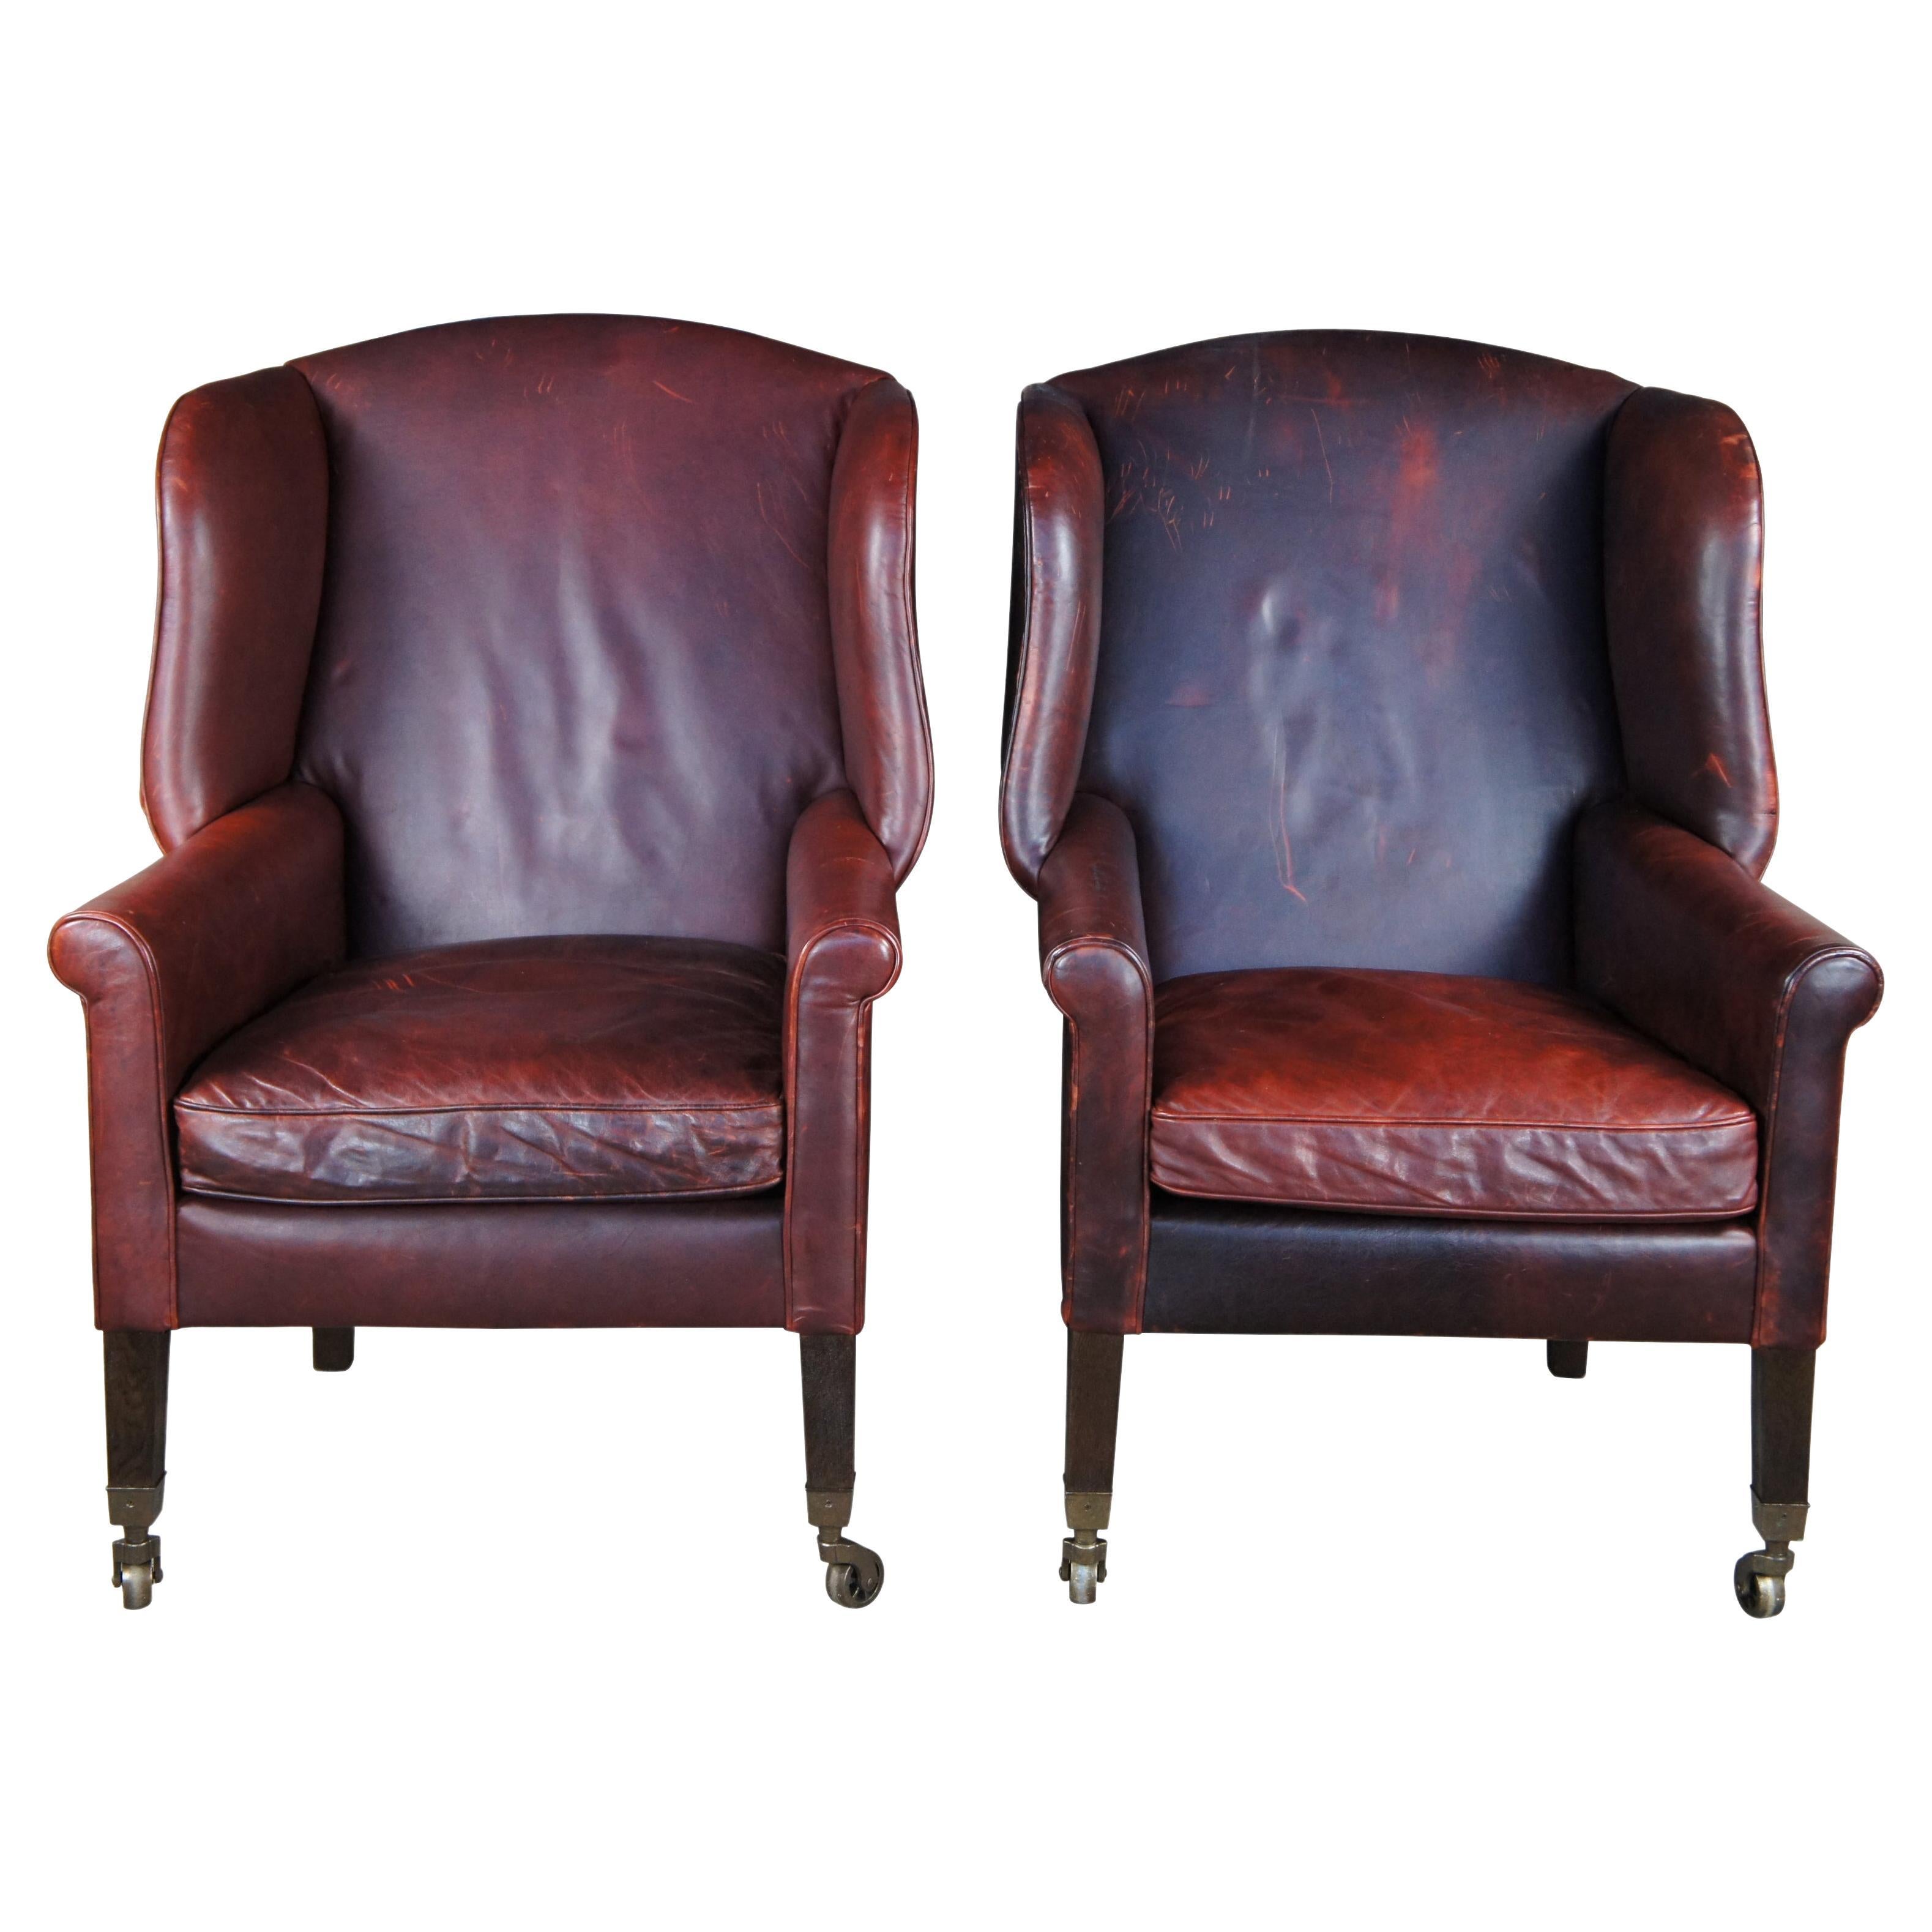 2 Restoration Hardware Asher Brown Leather Wingback Chairs English Fireside Pair